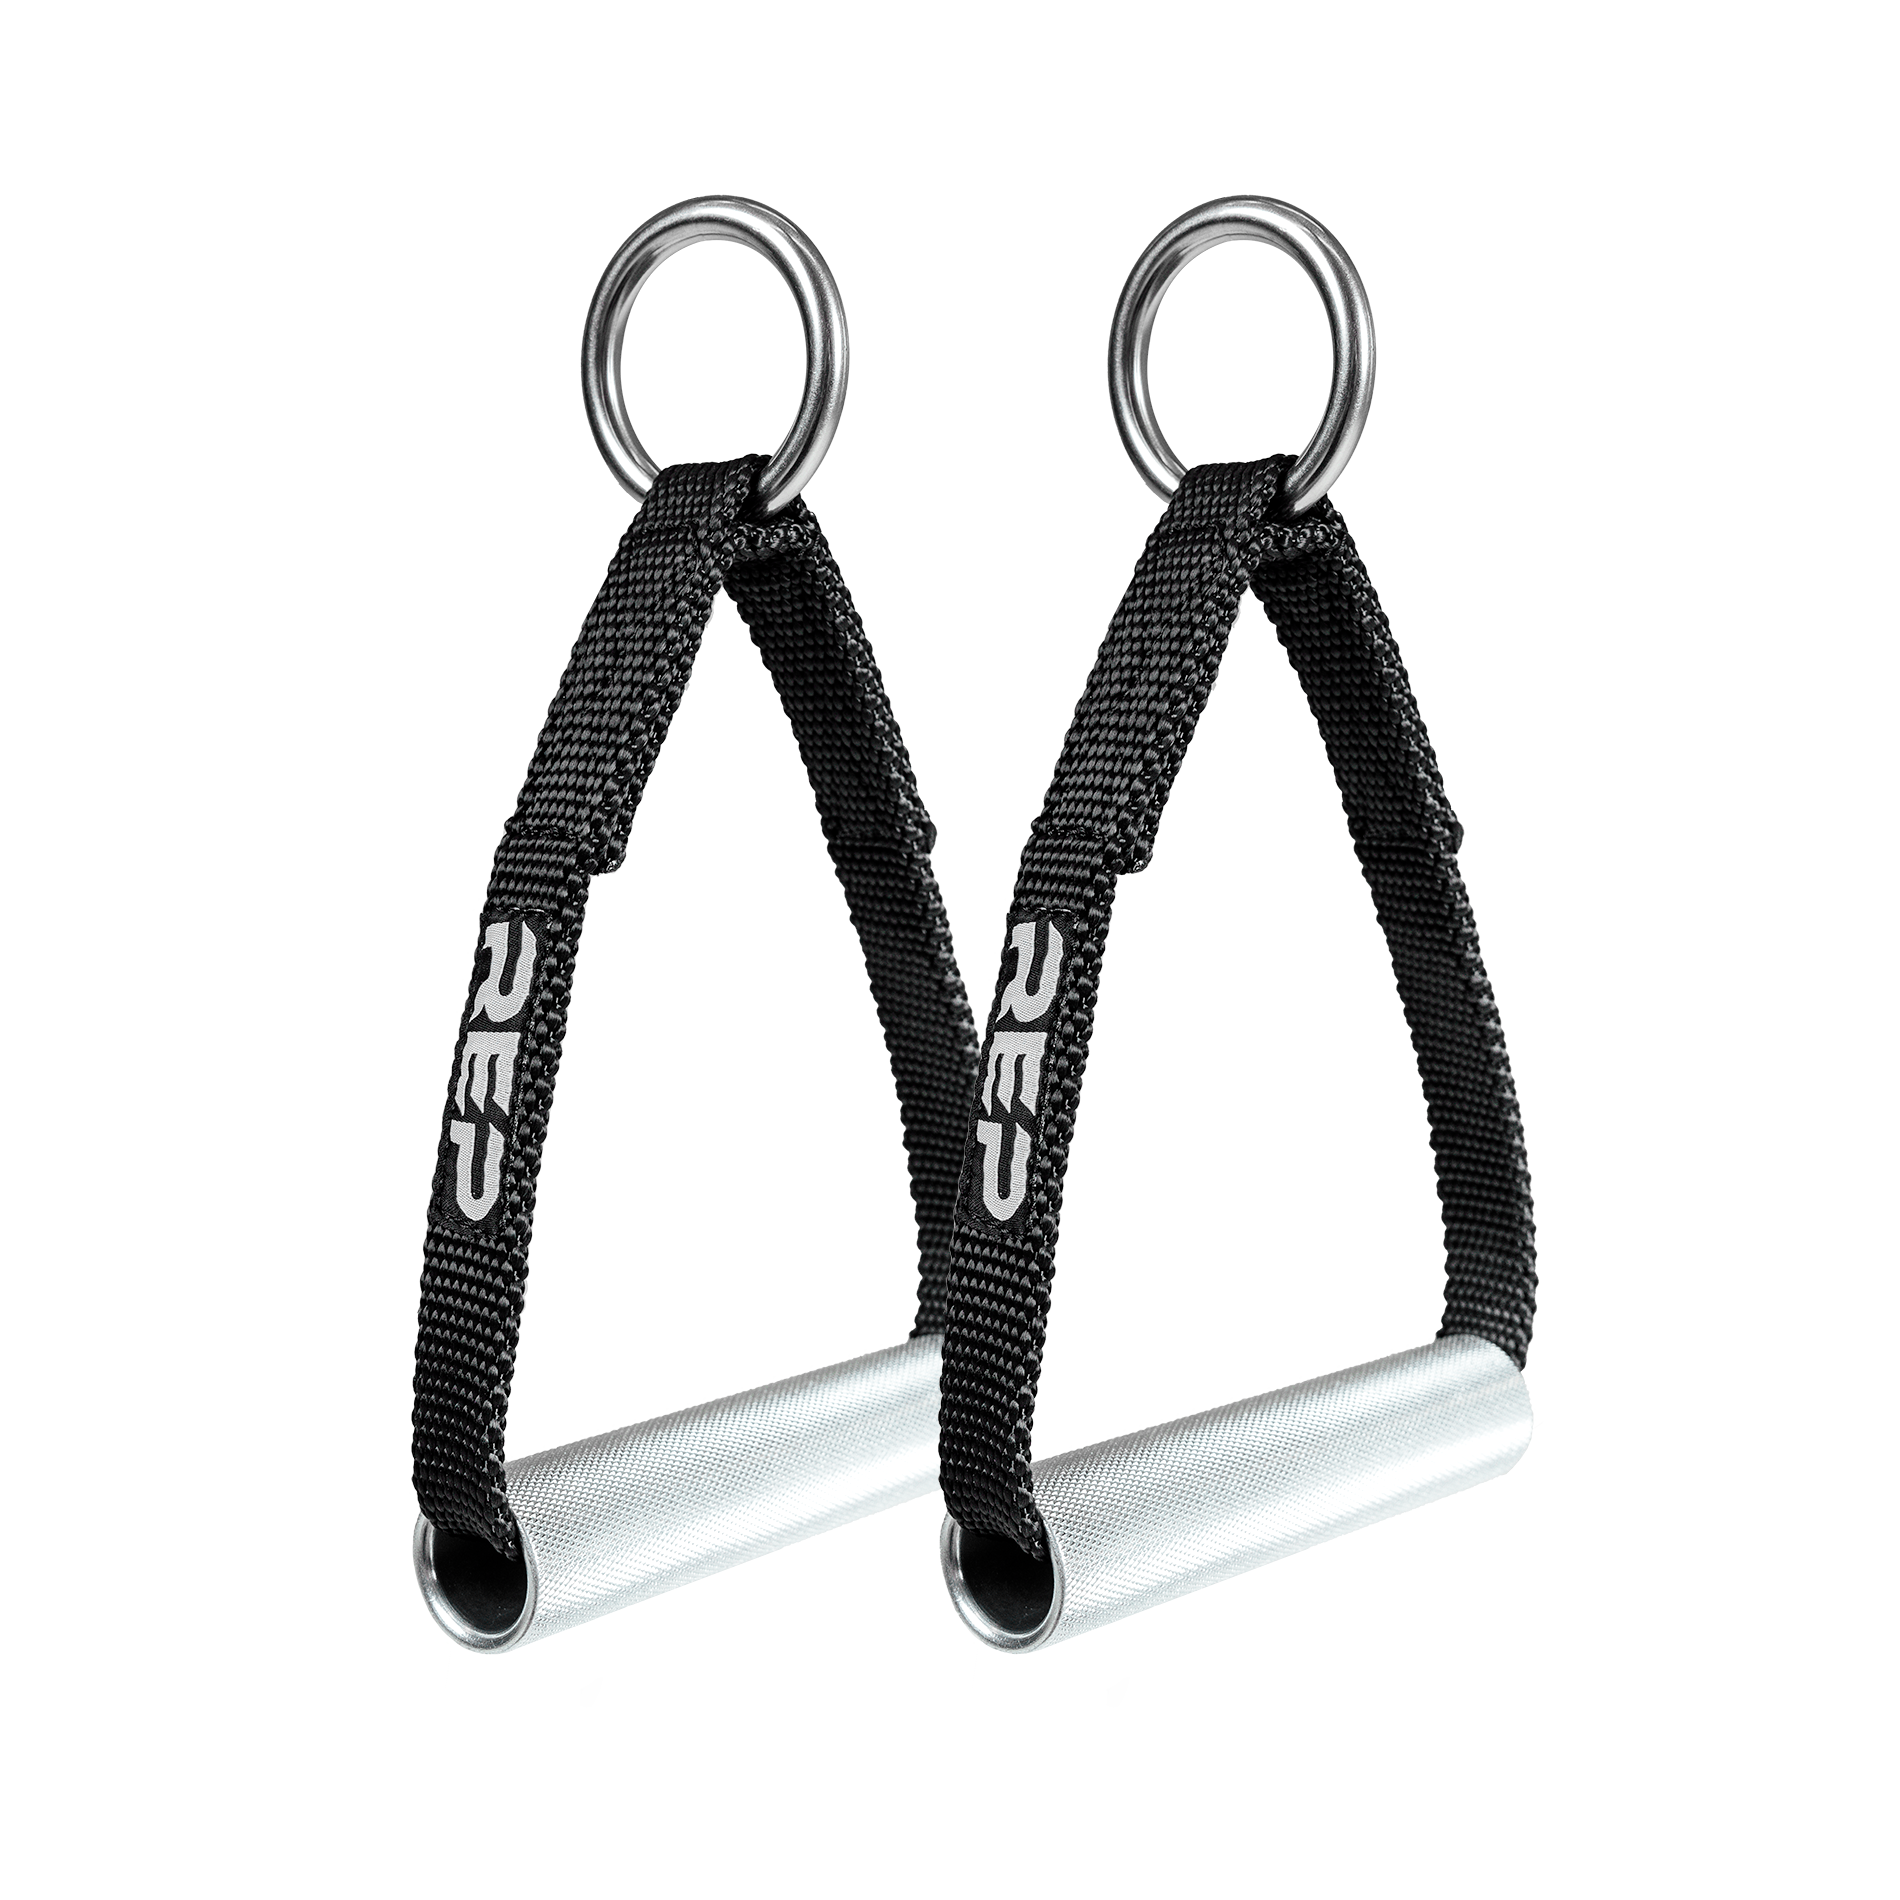 PRIME Fitness - The PRIME KAZ Handles! . These handles offer incredible  versatility, with the ability to transform a “D” style handle, to a longer  option for the functionality similar to a